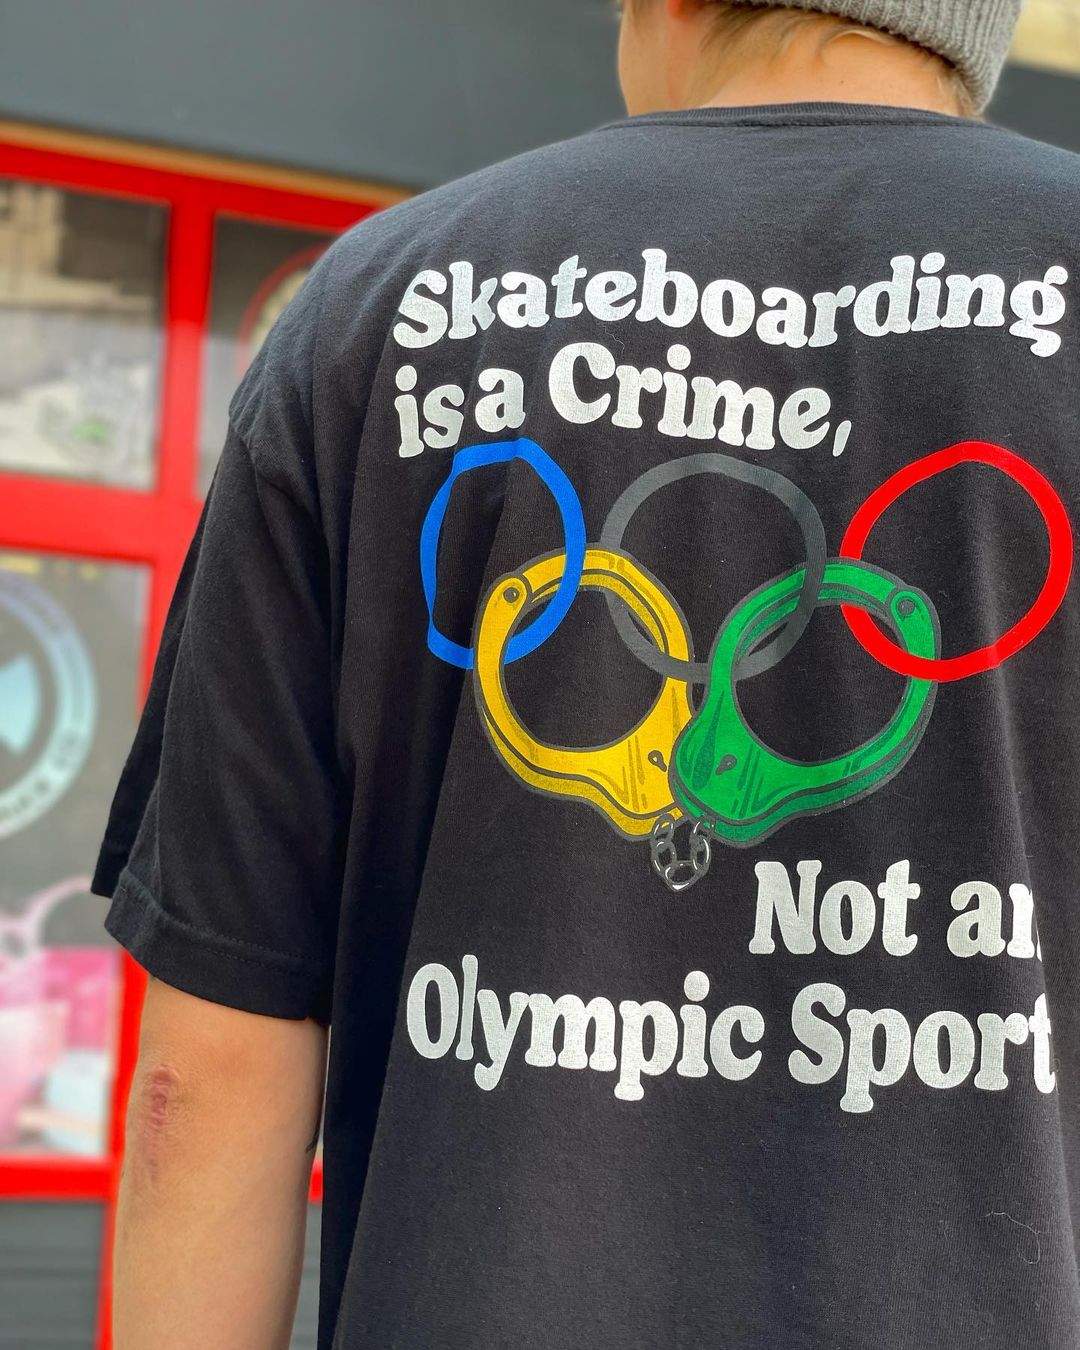 Statement: Skateboarding and the Olympics